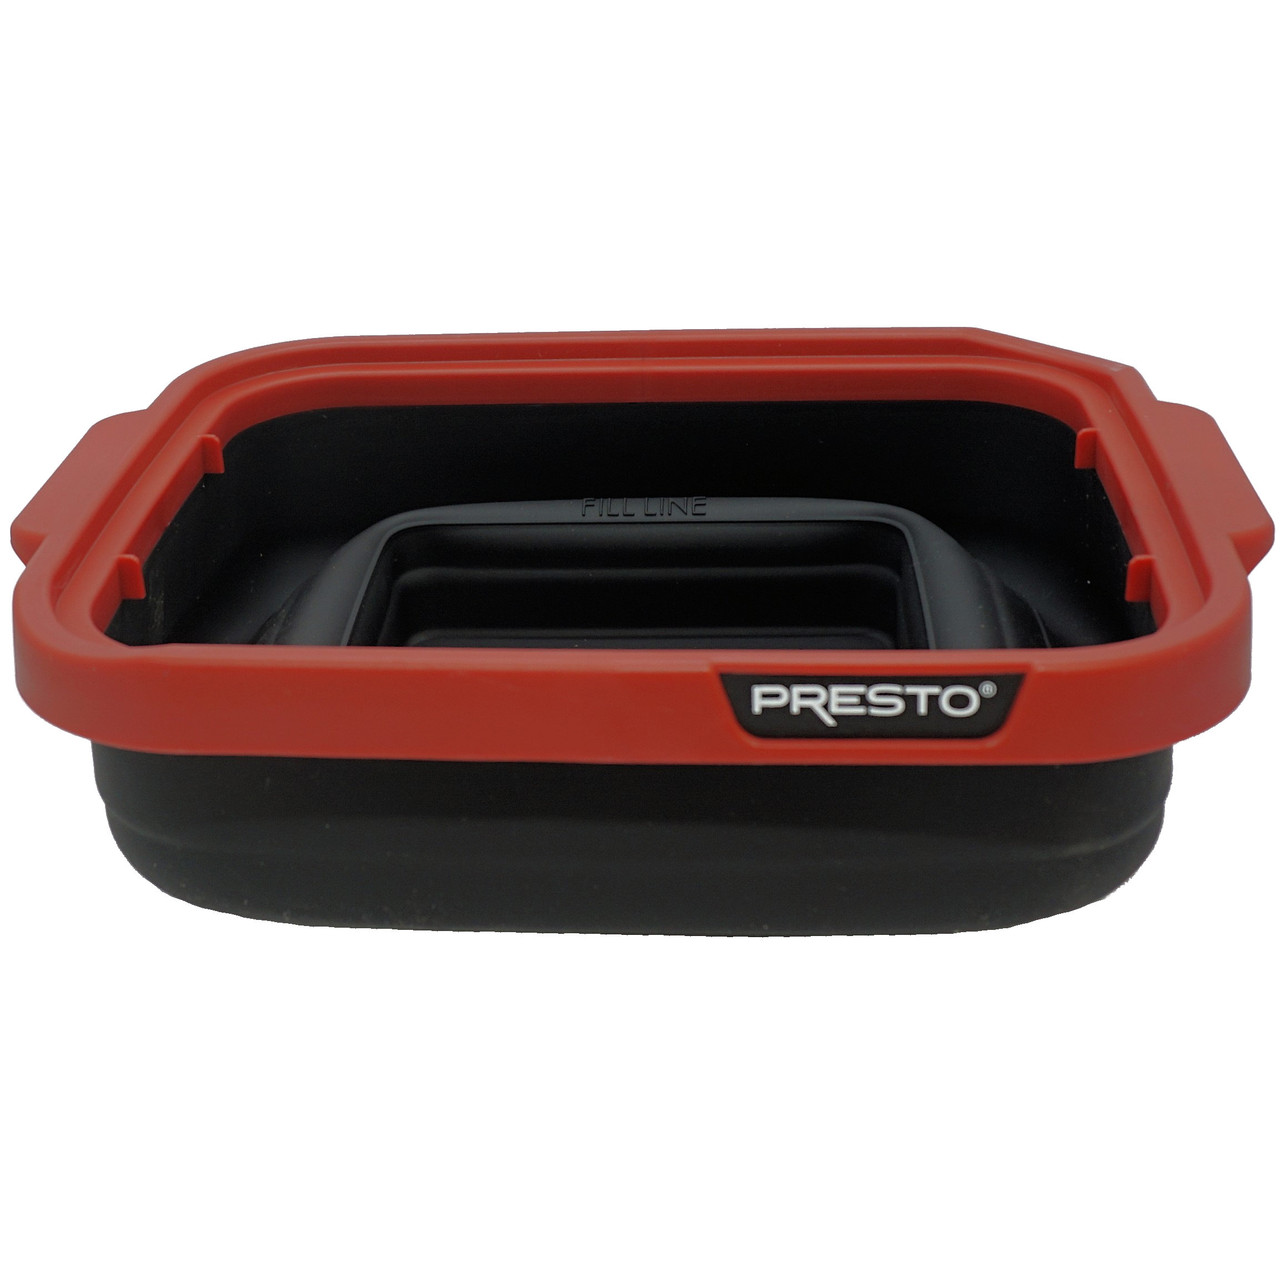 Presto Drip Catch for Nomad Traveling Slow Cooker, 4011039 - Seneca River  Trading, Inc.